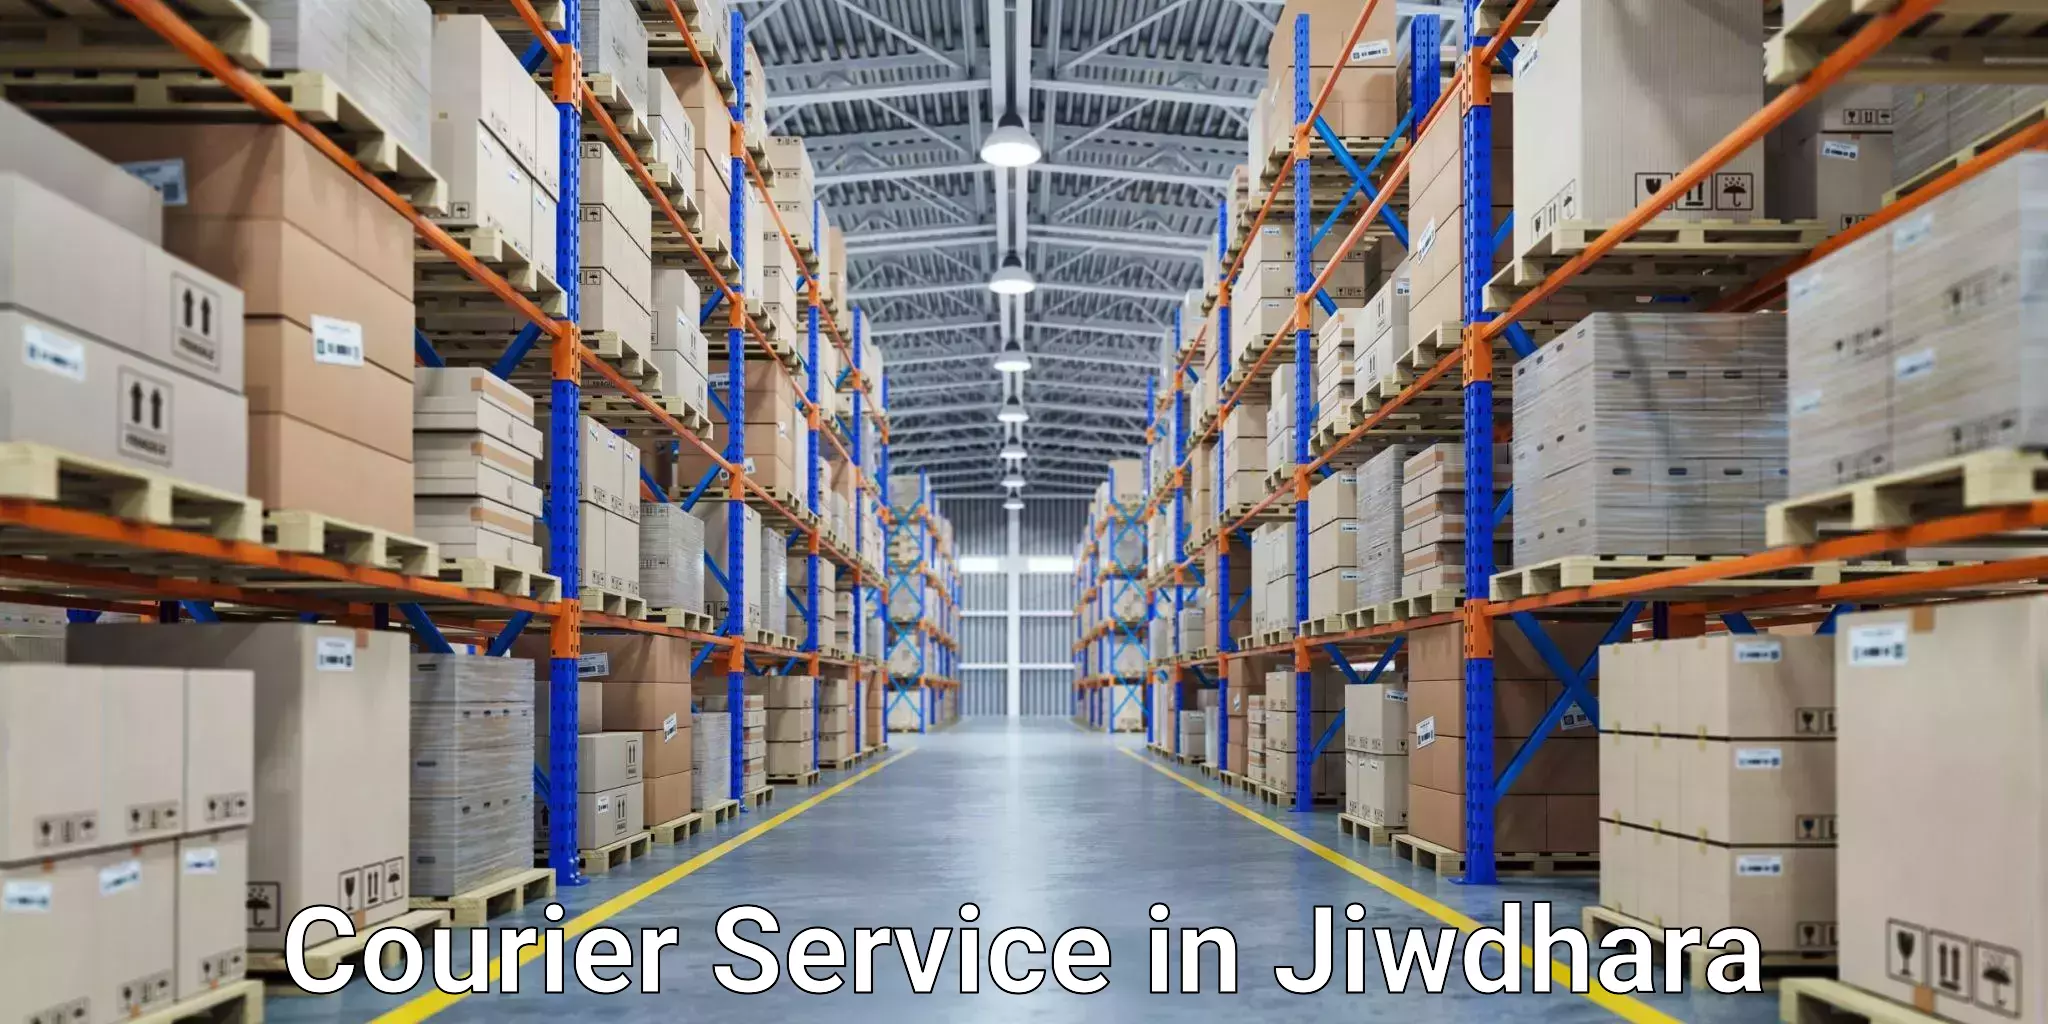 Reliable delivery network in Jiwdhara